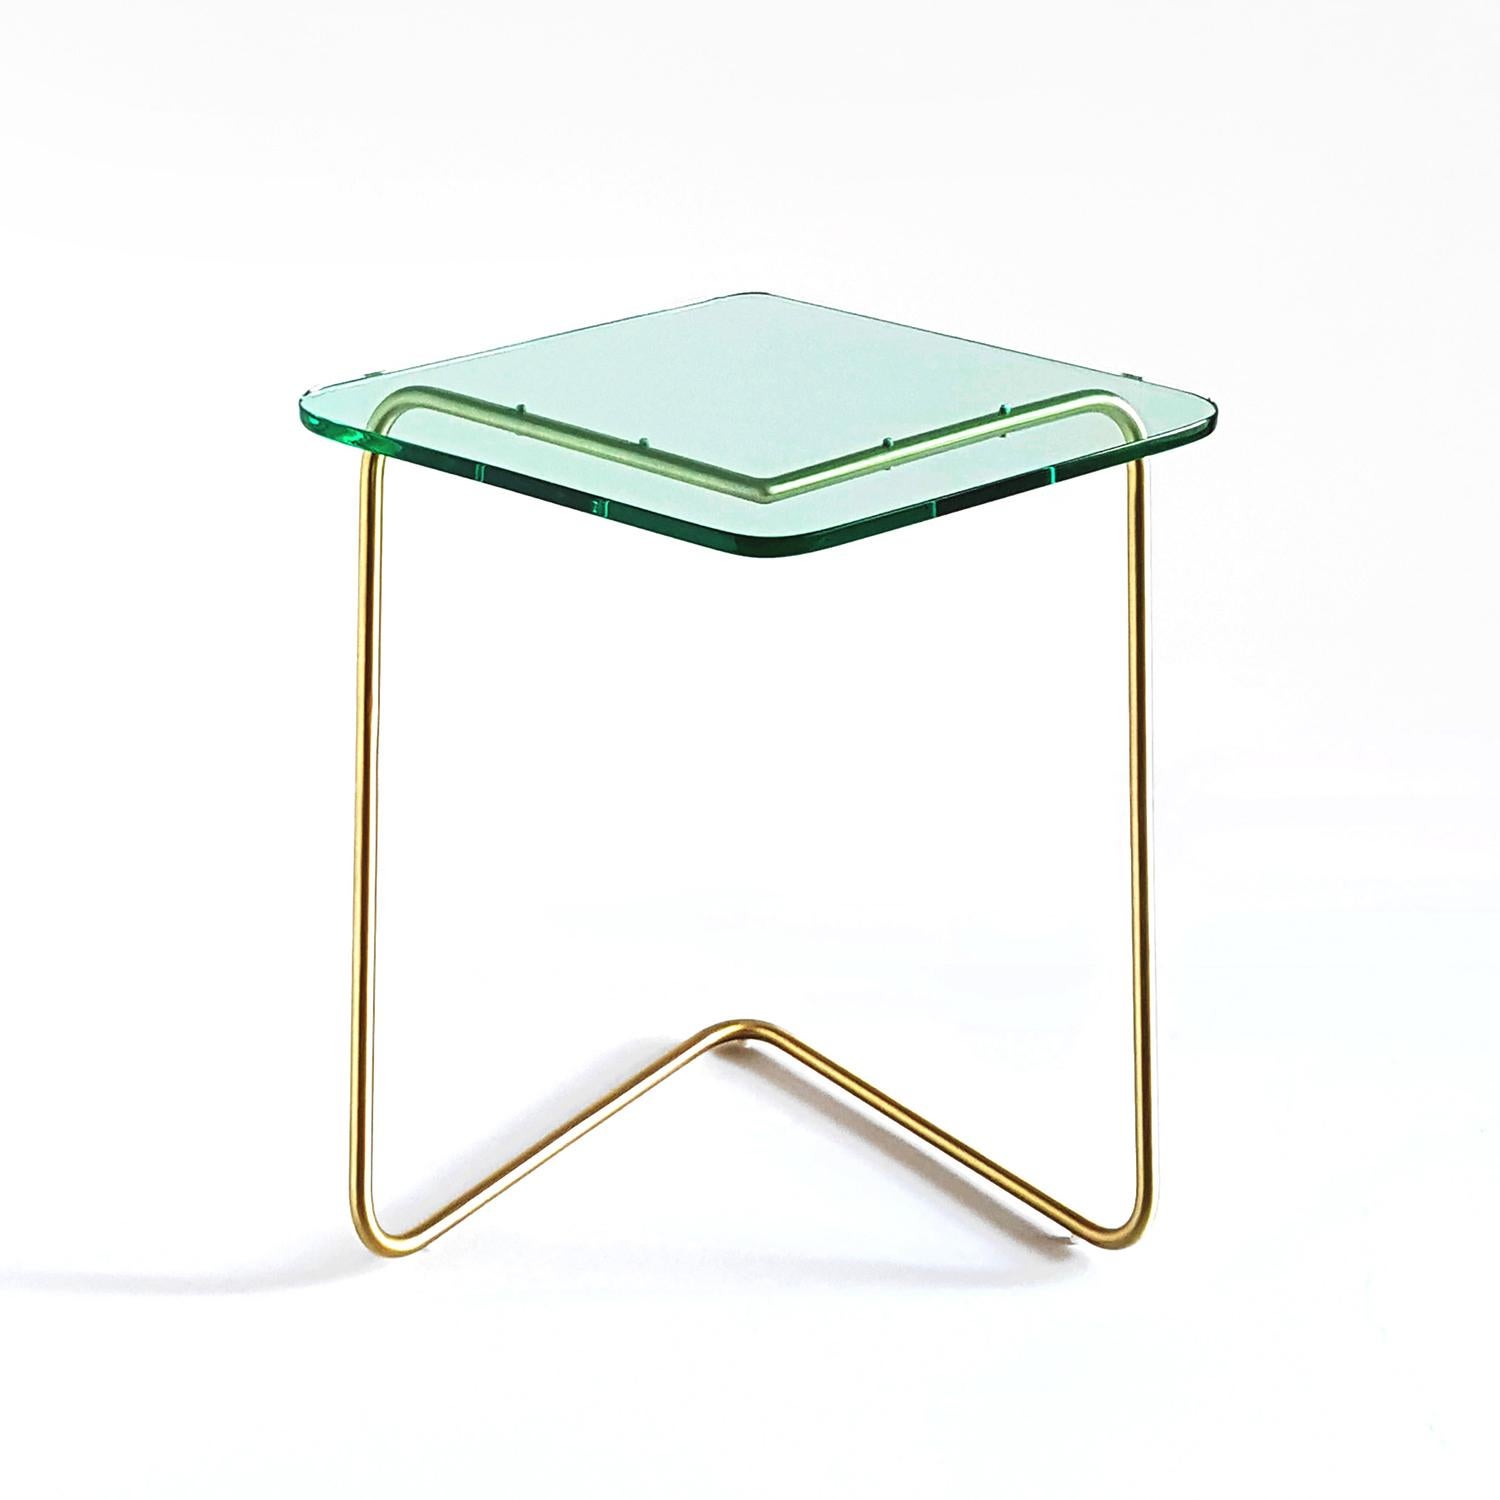 The diamond side table by Rita Kettaneh 
Dimensions: The base: brushed stainless steel plated with brass
 Optionally plated with copper or brass
 The top: acrylic
Materials: H 42 x W 45 x D 34.5 cm
Weight: 2.65 Kg

Colors and finishes: